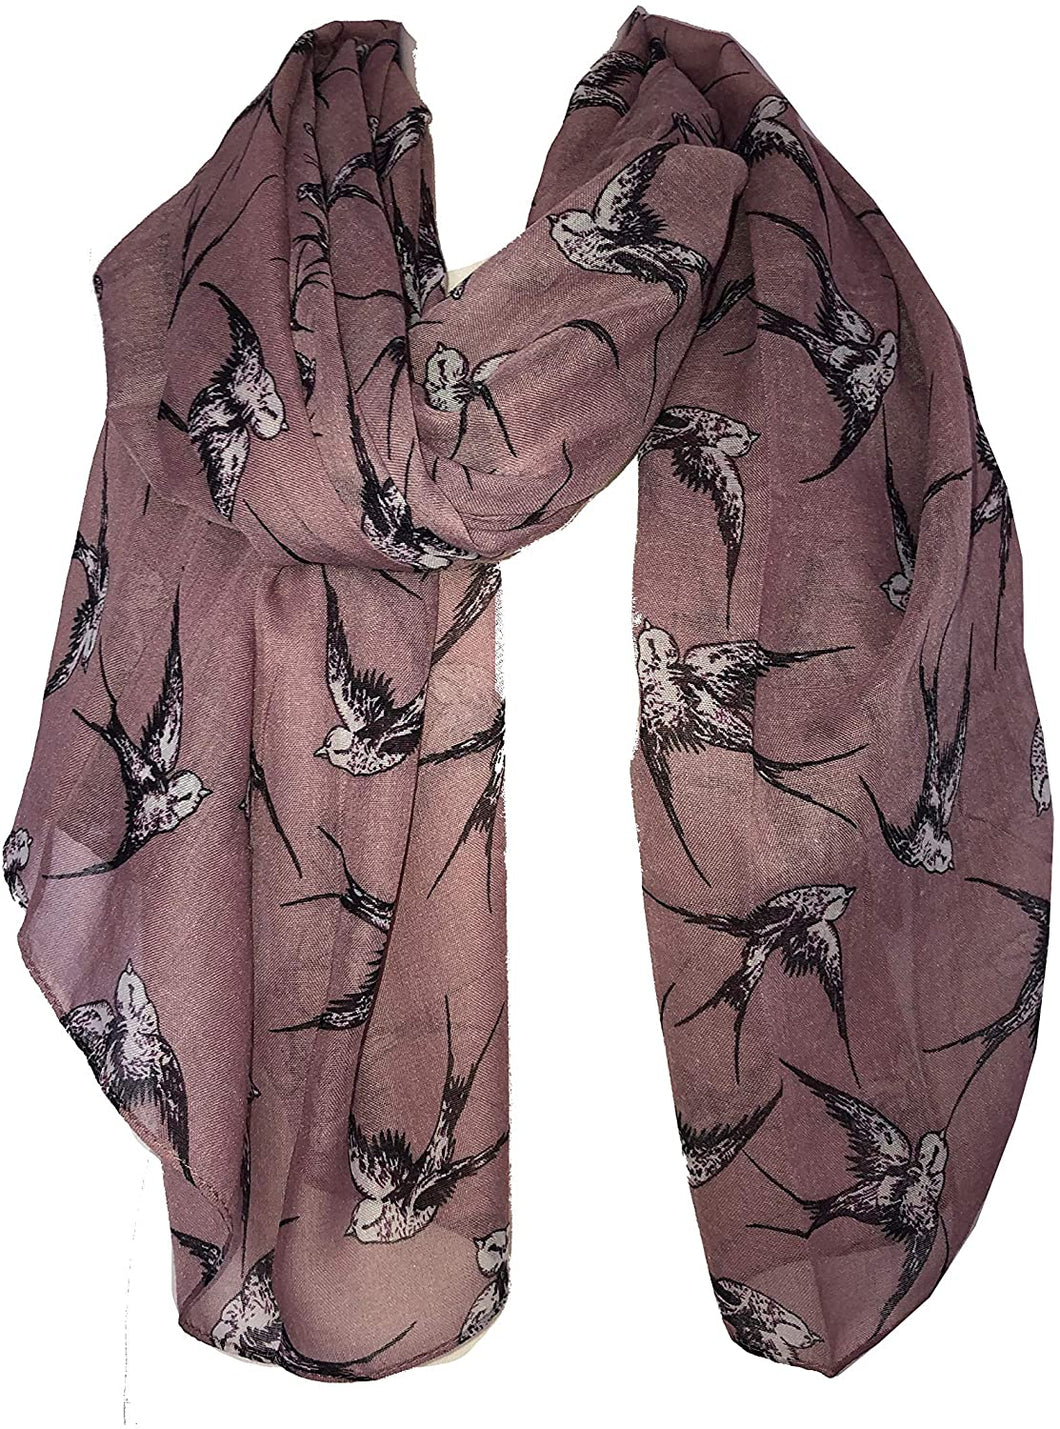 Pamper Yourself Now Pink Big Swallow Scarf